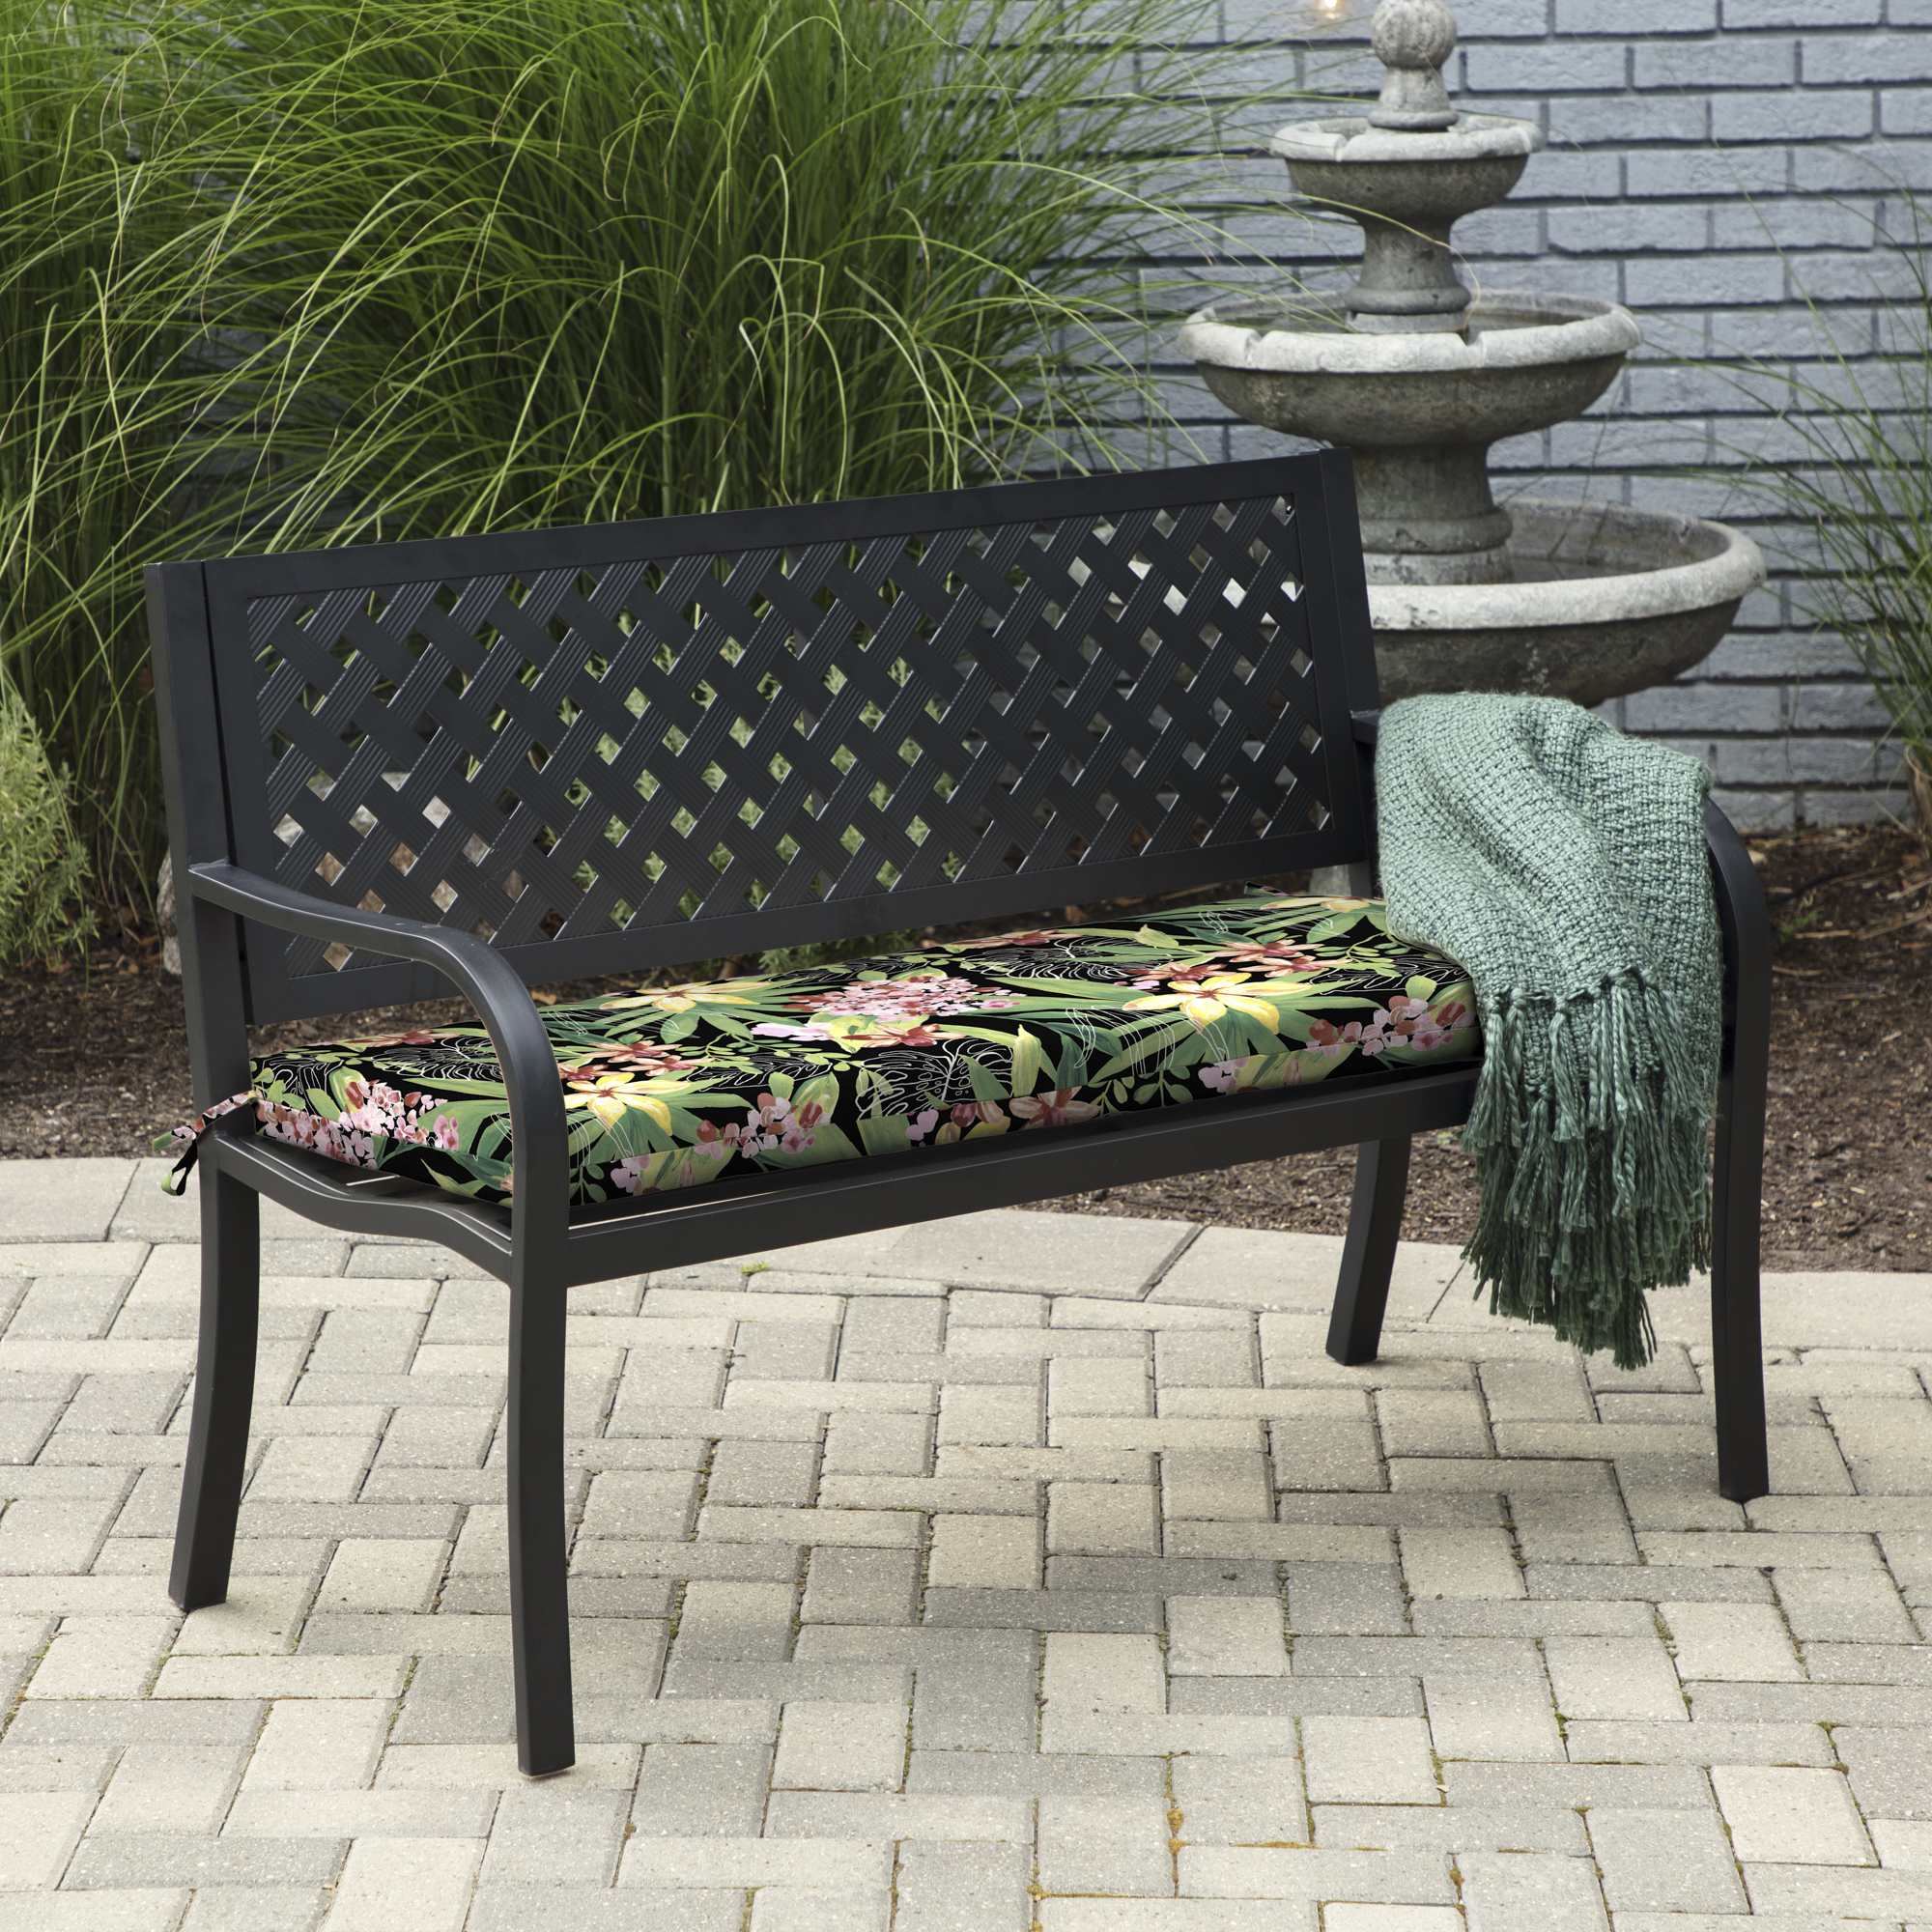 Better Homes & Gardens Black Tropical 17" x 46" Outdoor Bench Cushion - image 2 of 8